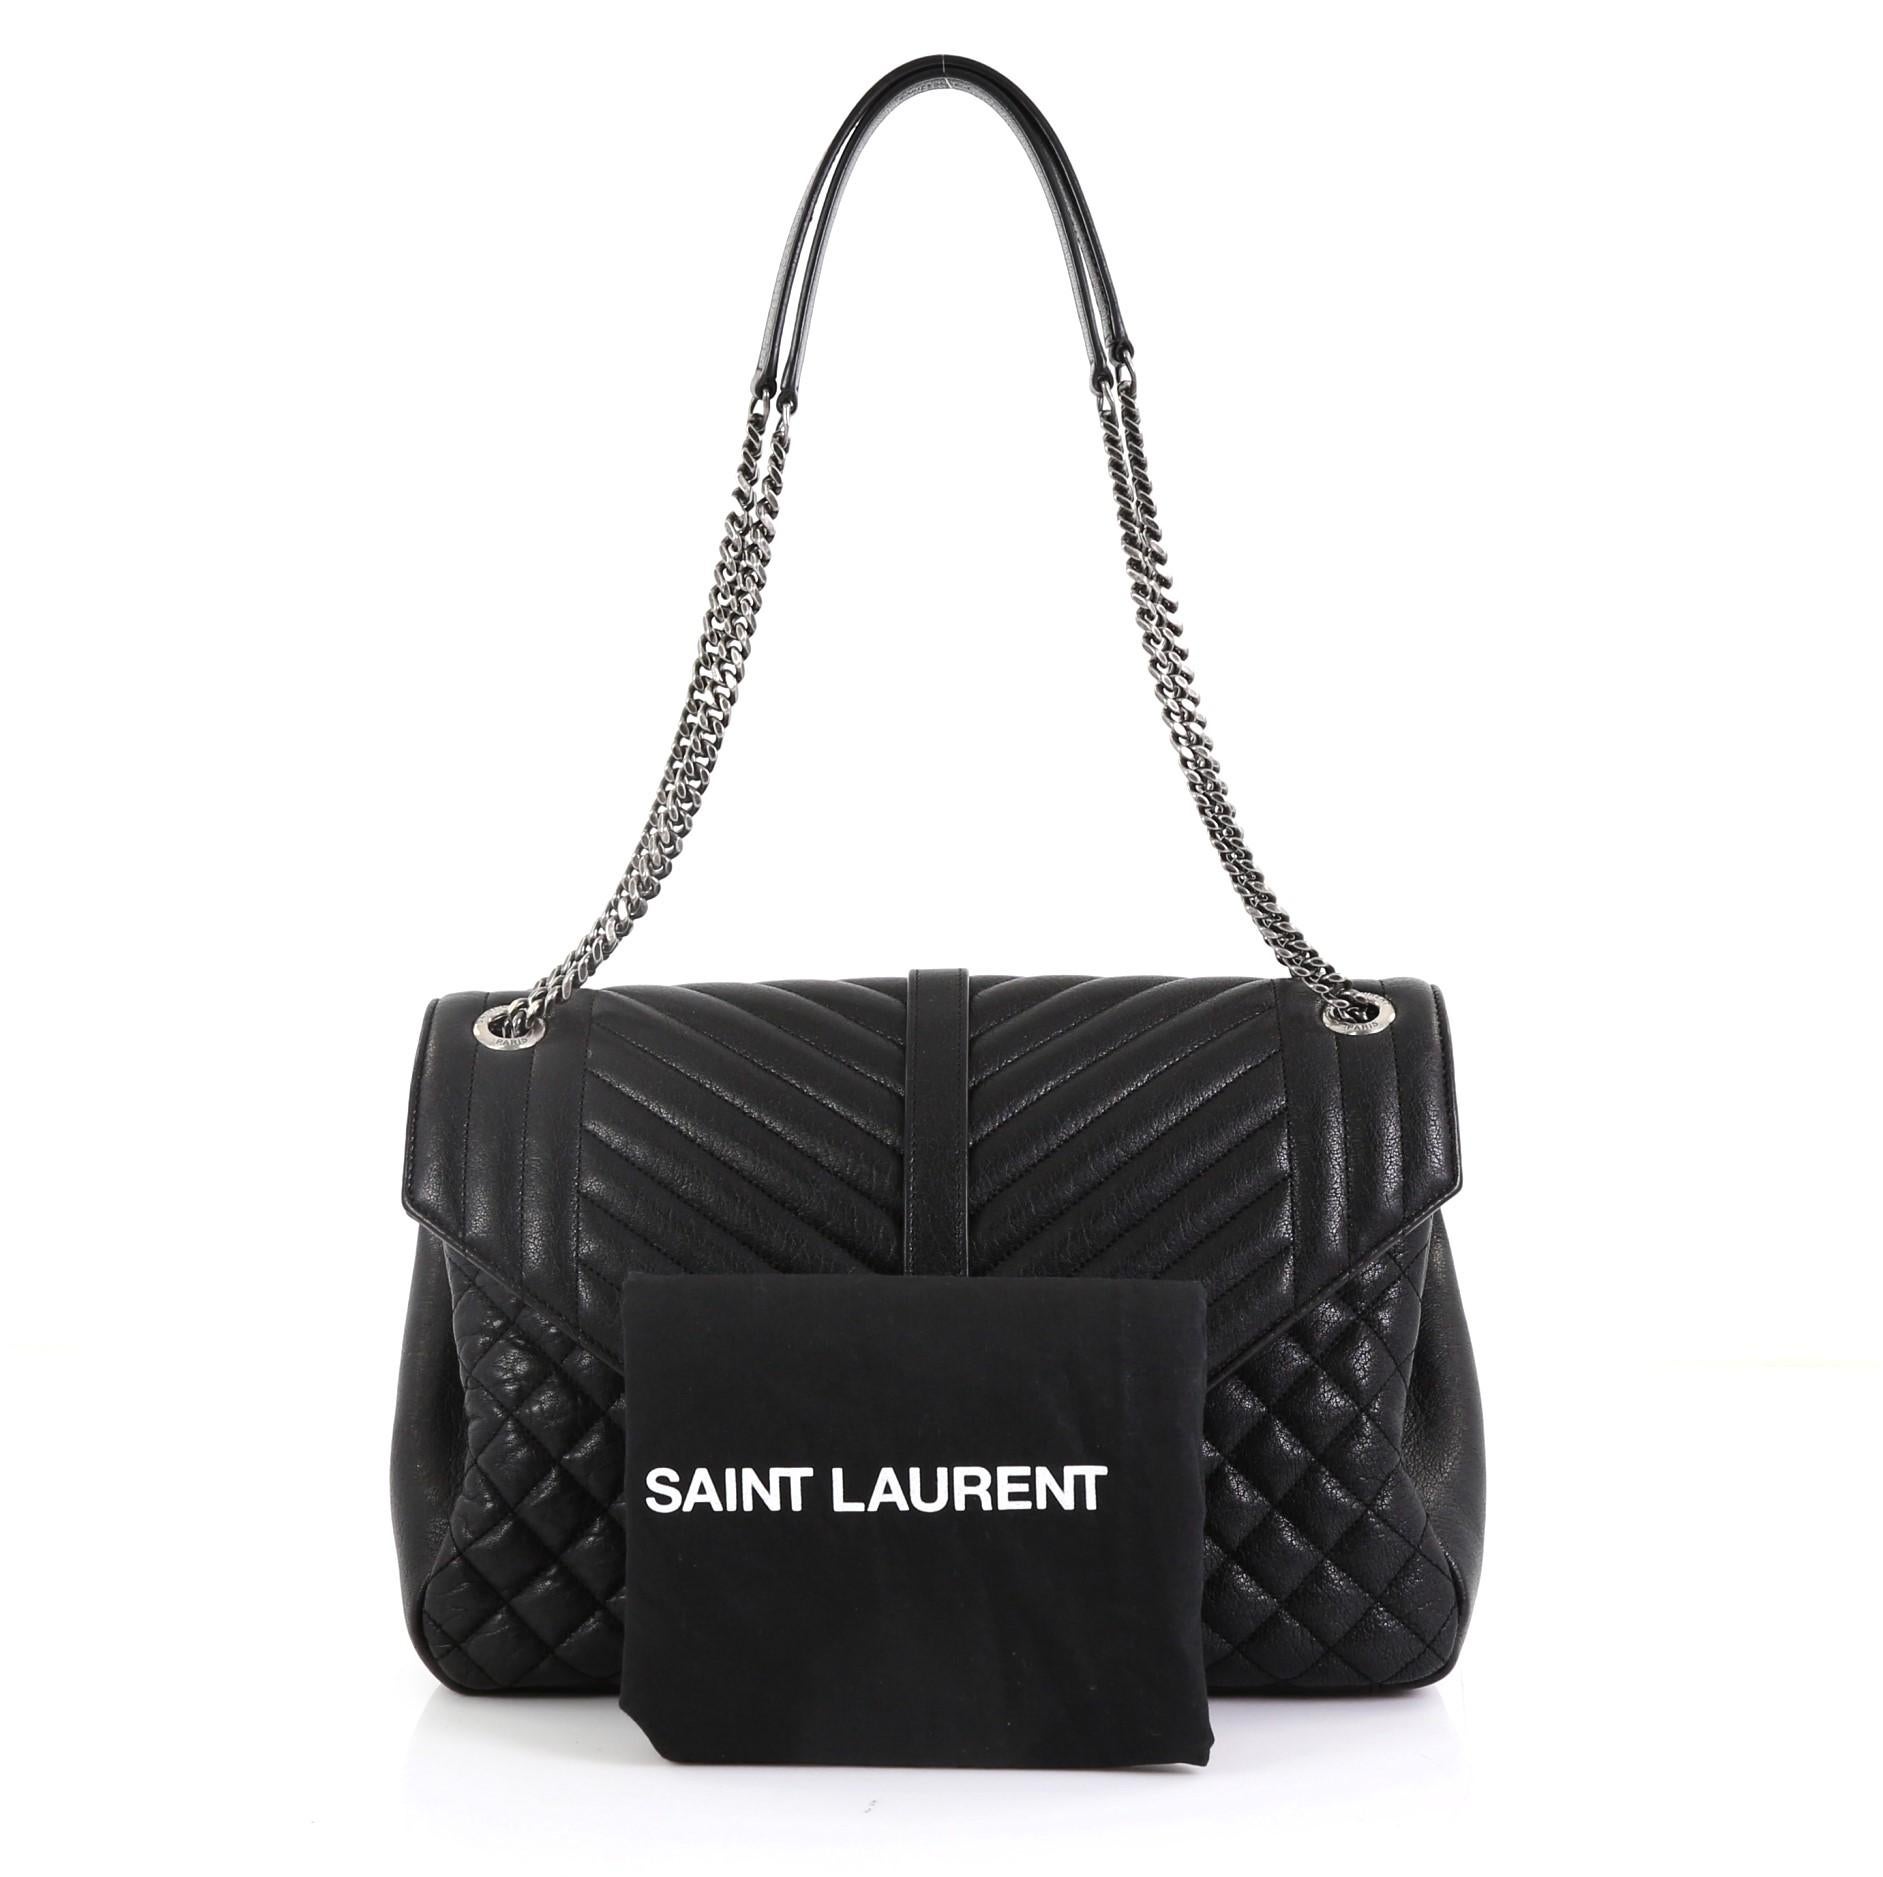 This Saint Laurent Classic Monogram Slouchy Envelope Satchel Quilted Leather Large, crafted from black quilted leather, features dual chain-link shoulder straps with leather pads, YSL monogram logo at the front, and aged silver-tone hardware. Its